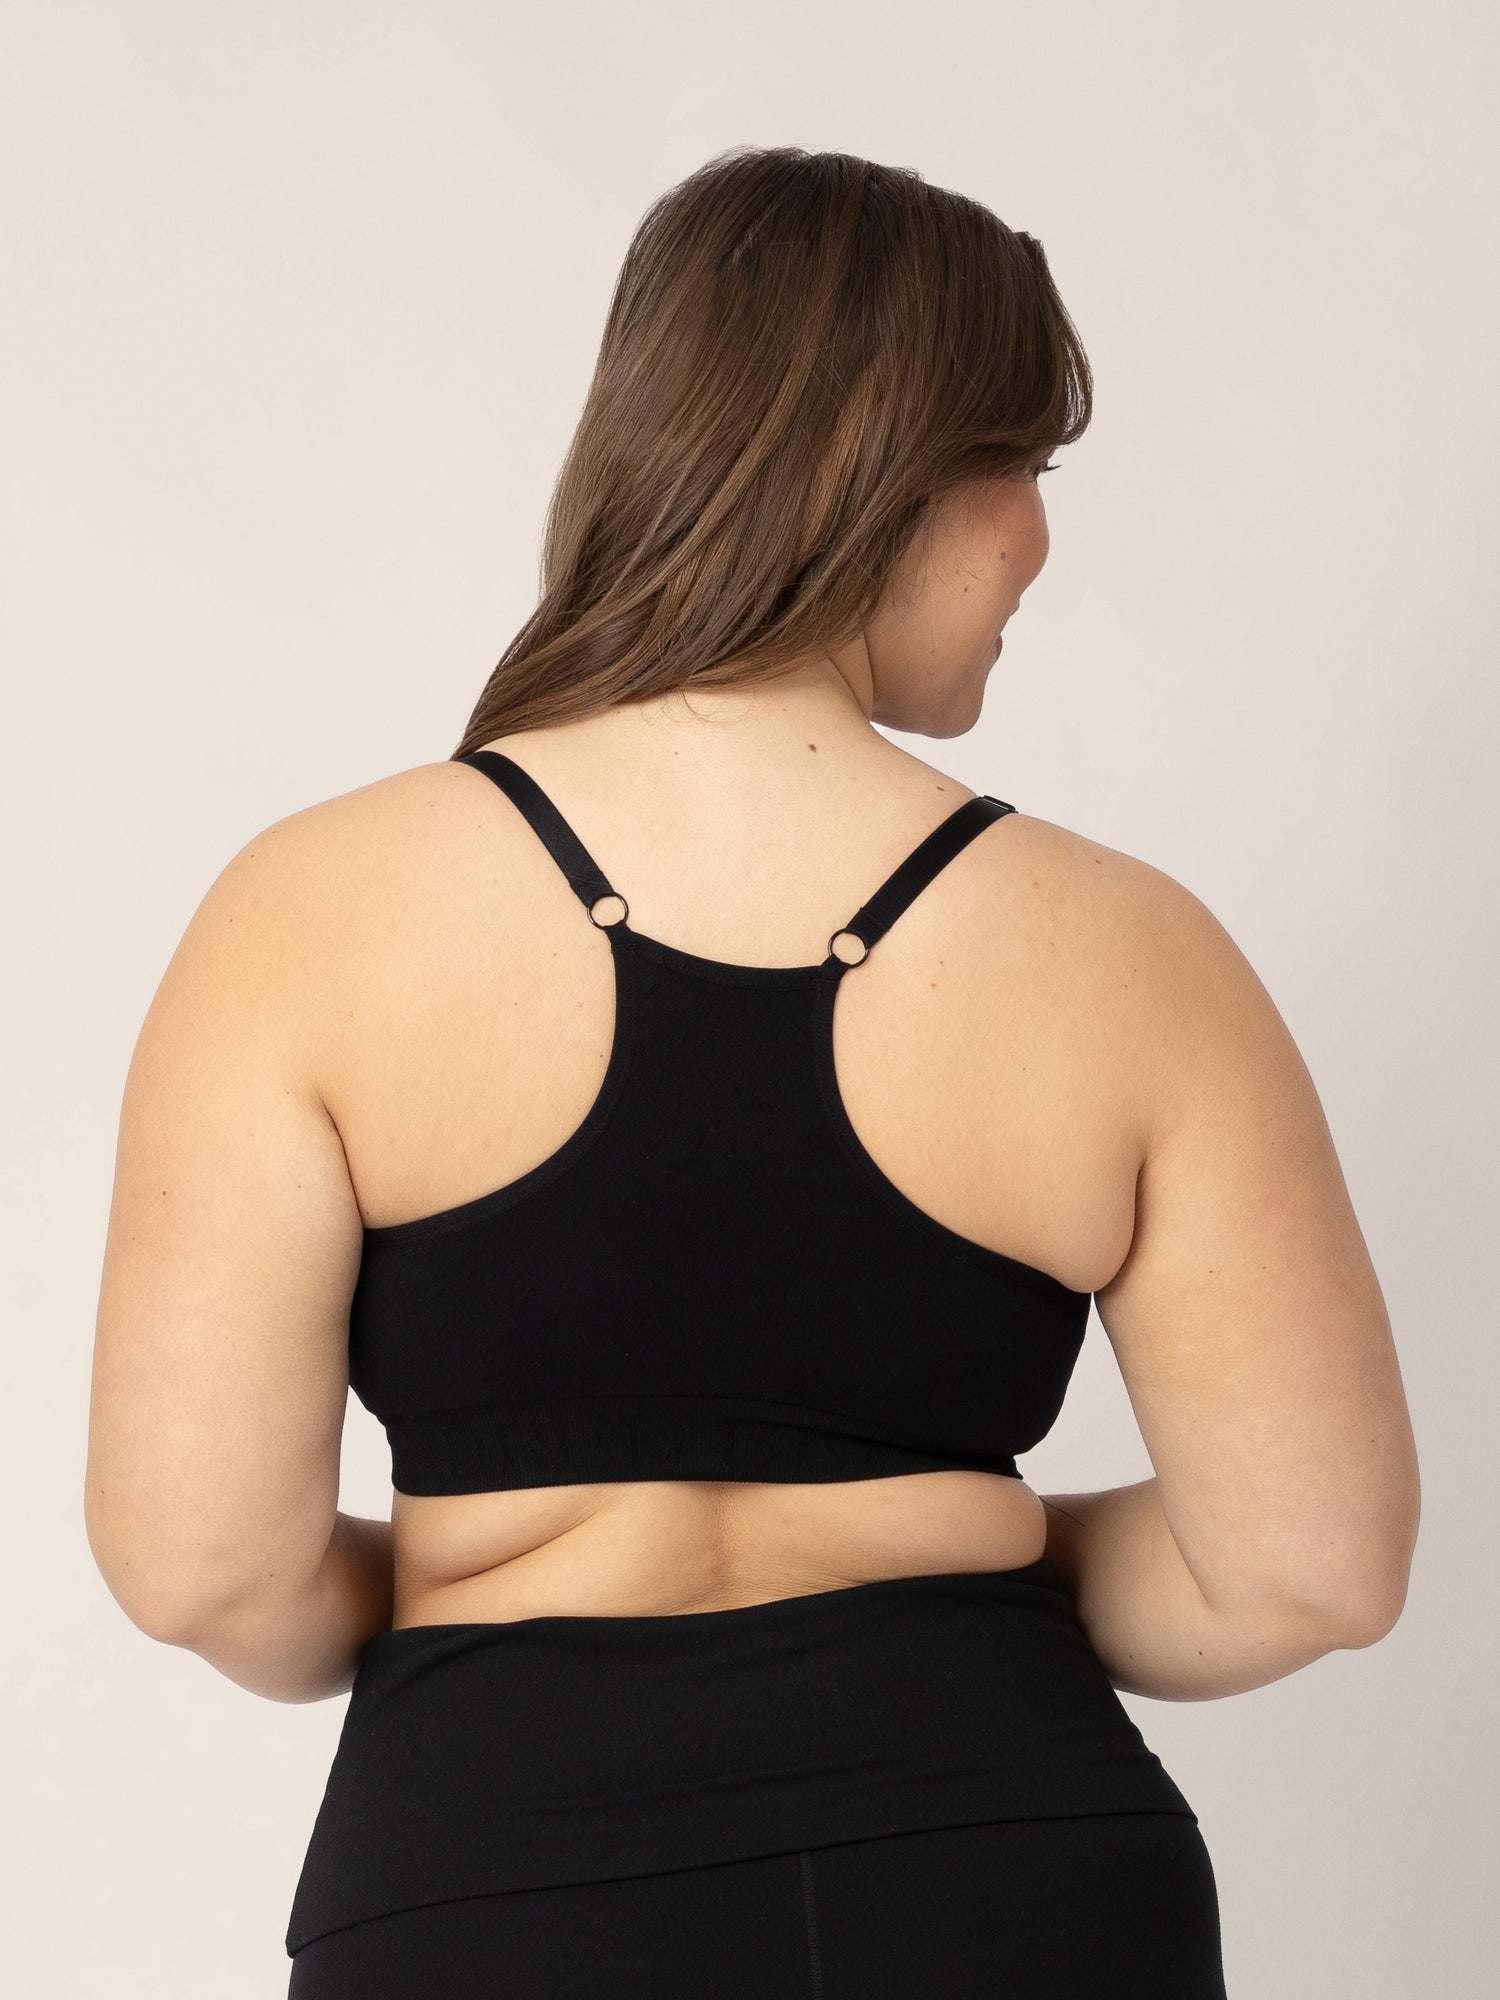 Most of our Ultra Comfort Activen nursing bra colors are restocked